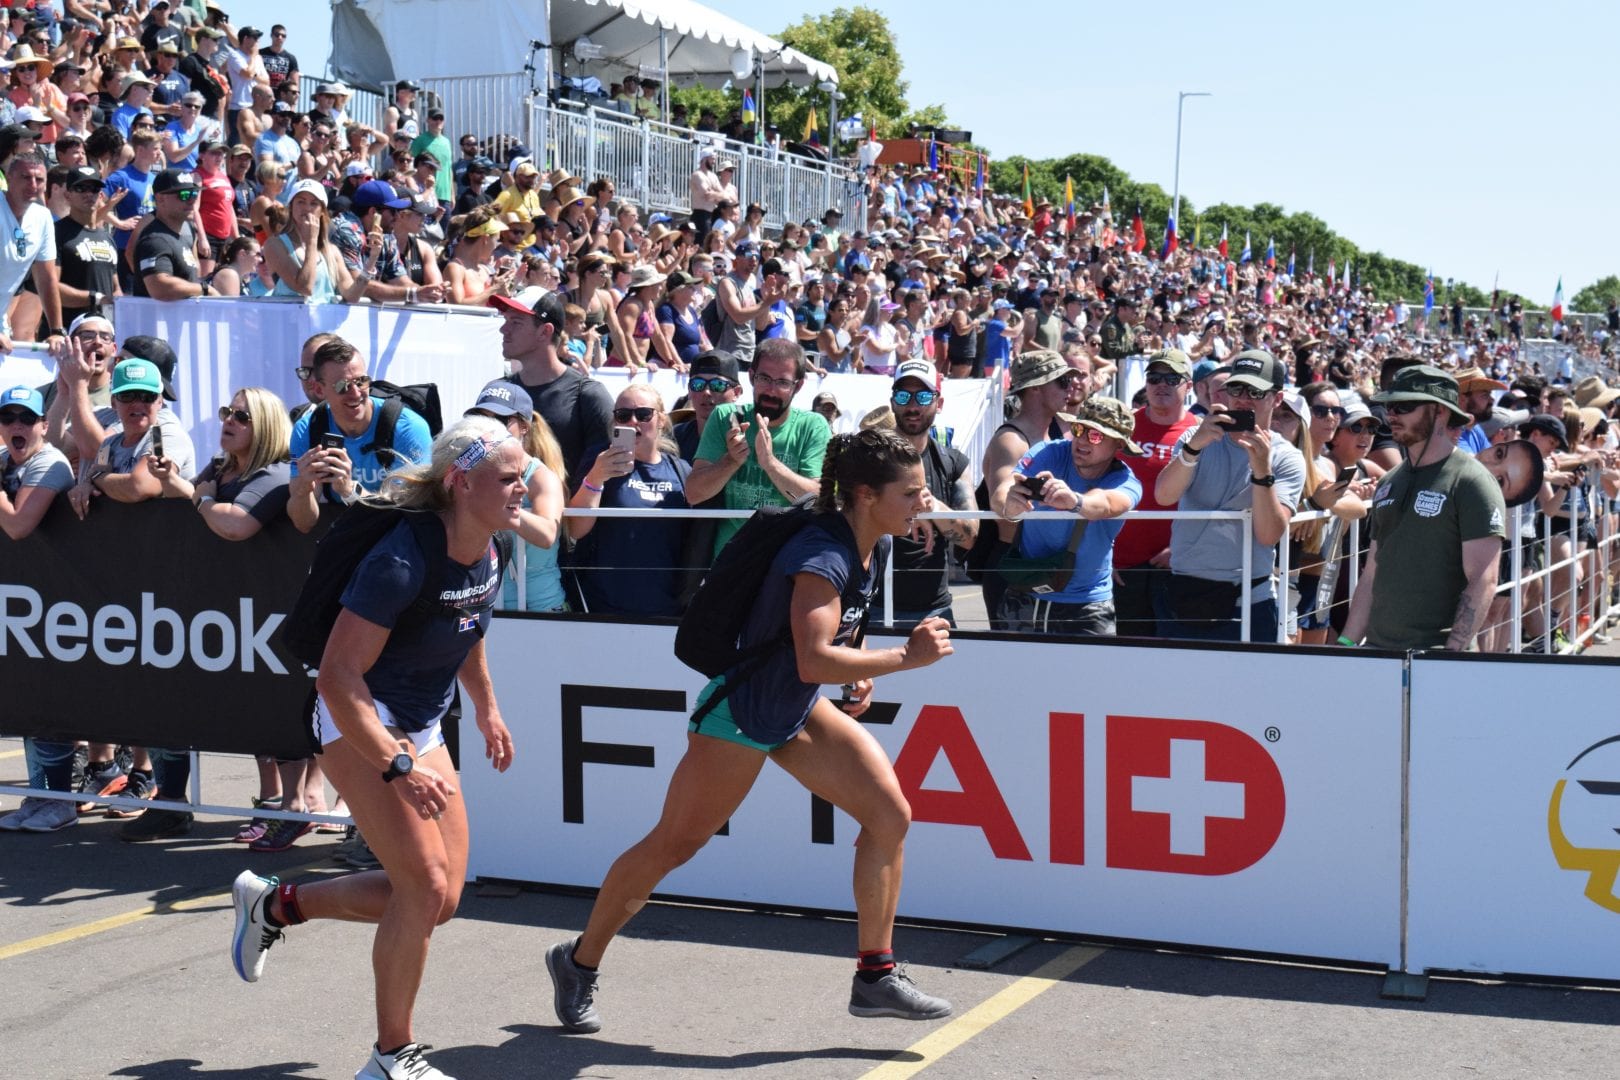 Sara Sigmundsdottir completes the Ruck Run event at the 2019 CrossFit Games.